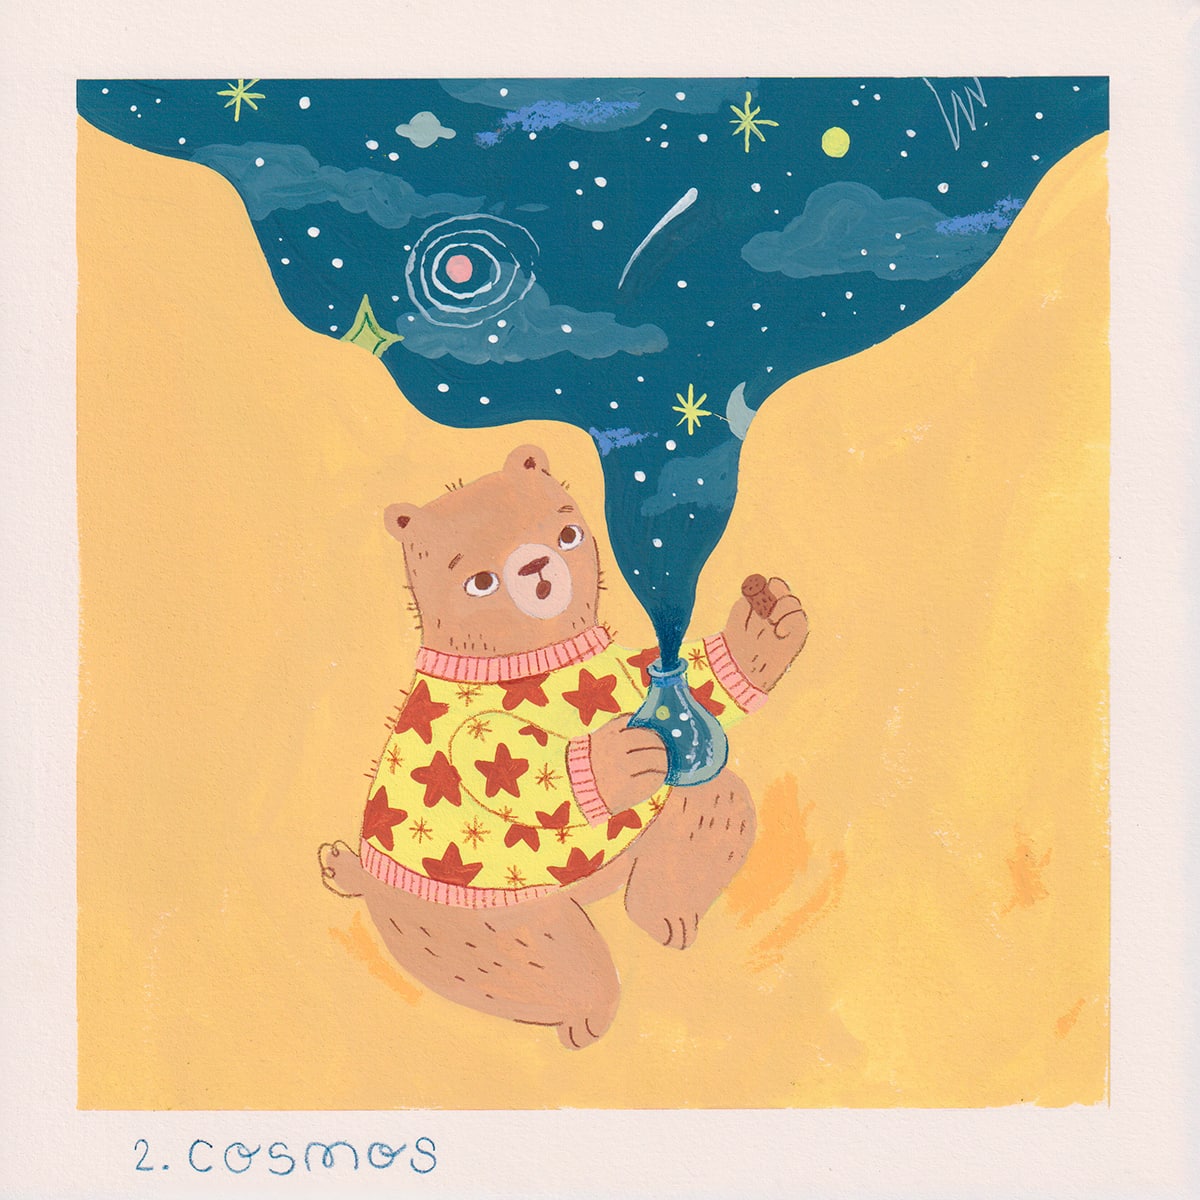 DAY 2 - Cosmos